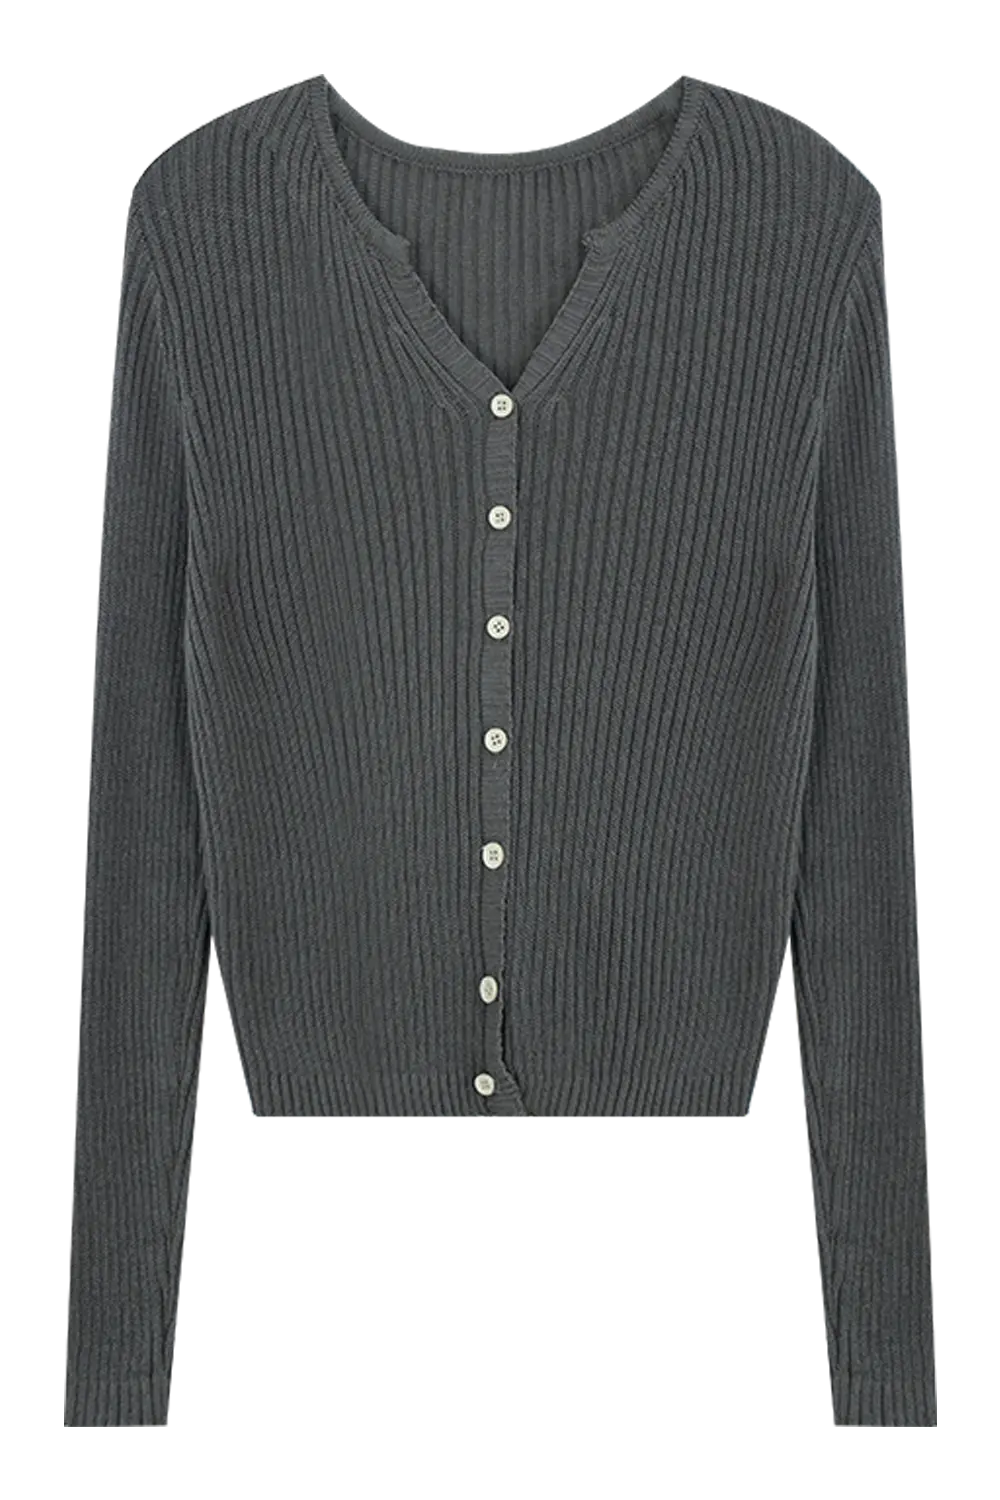 Chic Comfort: Classic Cardigan with Soft Texture and Button-Down Elegance